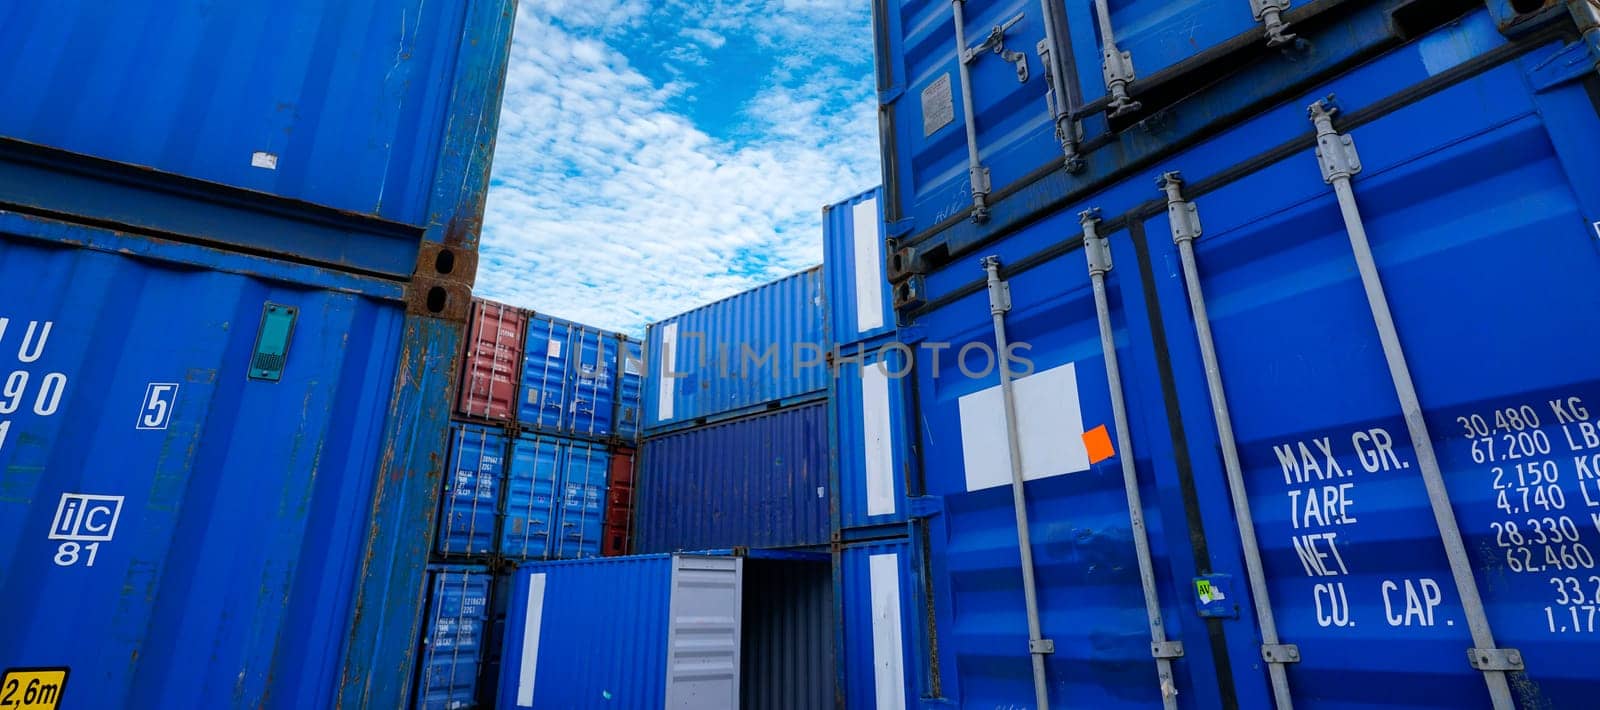 Container logistic. Cargo and shipping business. Container ship for import and export logistic. Container freight station. Logistic industry from port to port. Container at harbor for truck transport. by Fahroni